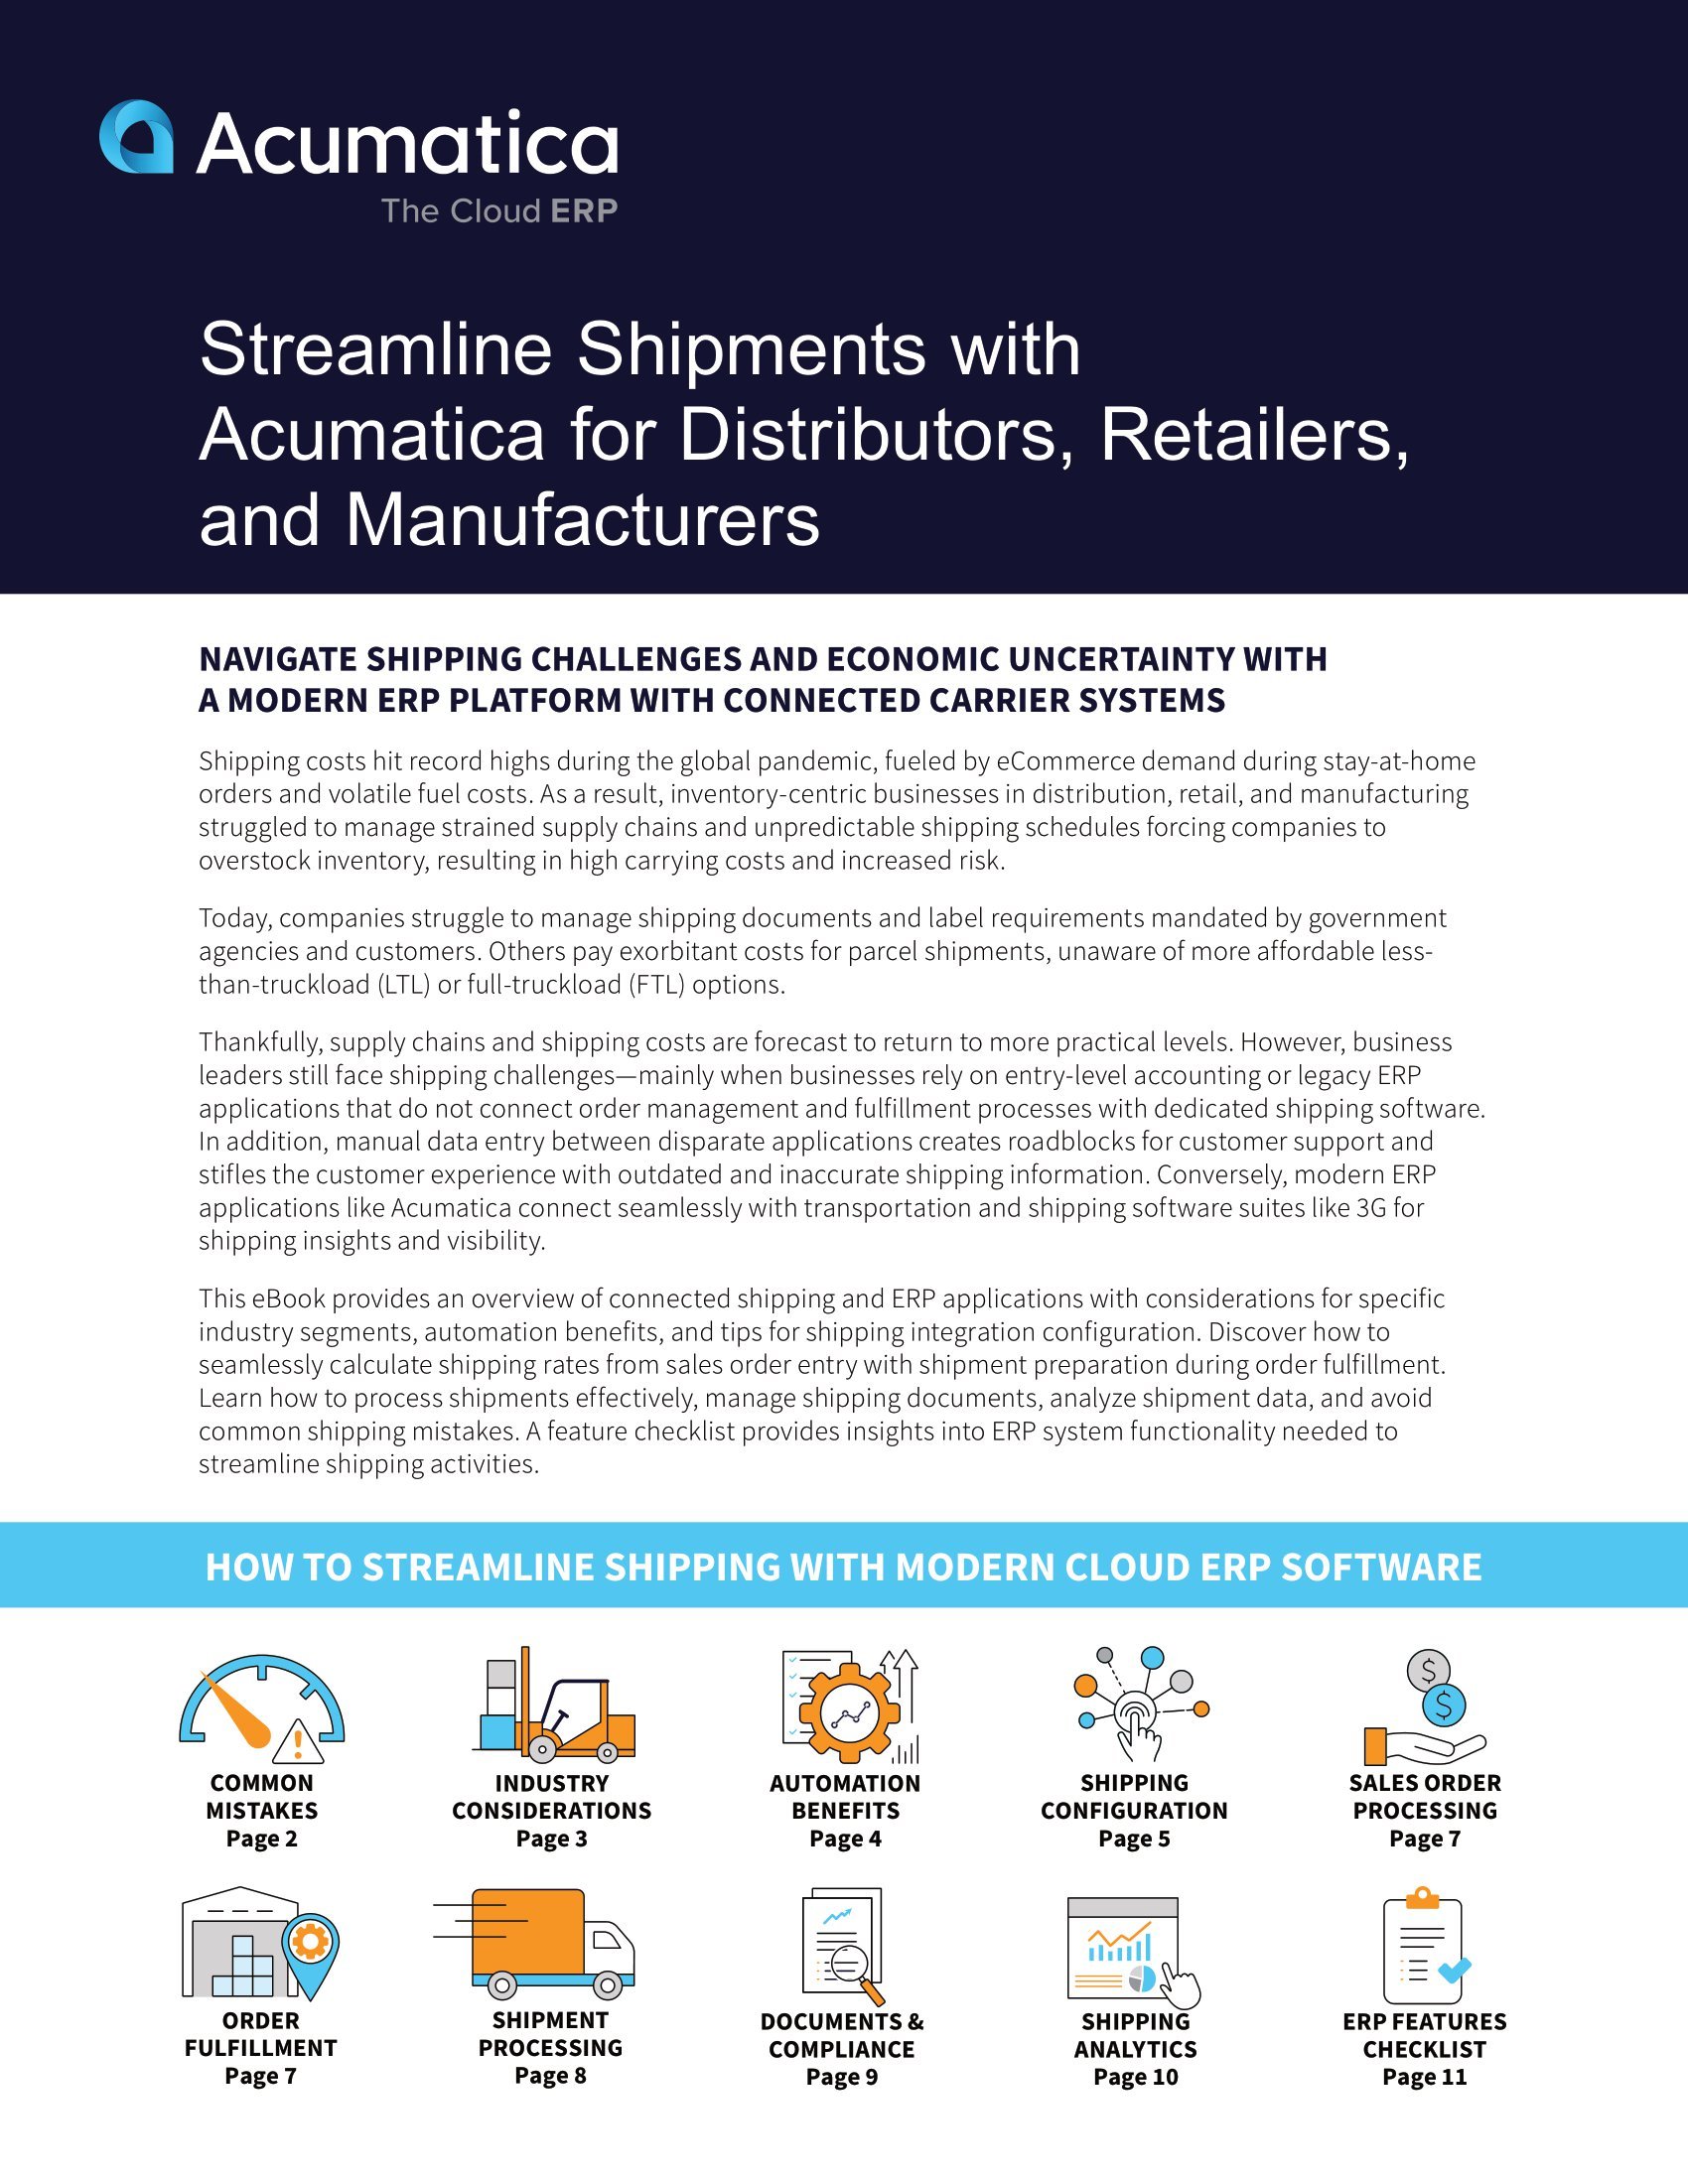 Why Modern Cloud ERP Applications and Connected Shipping is a Must for Today’s Distributors, Retailers, and Manufacturers, page 0